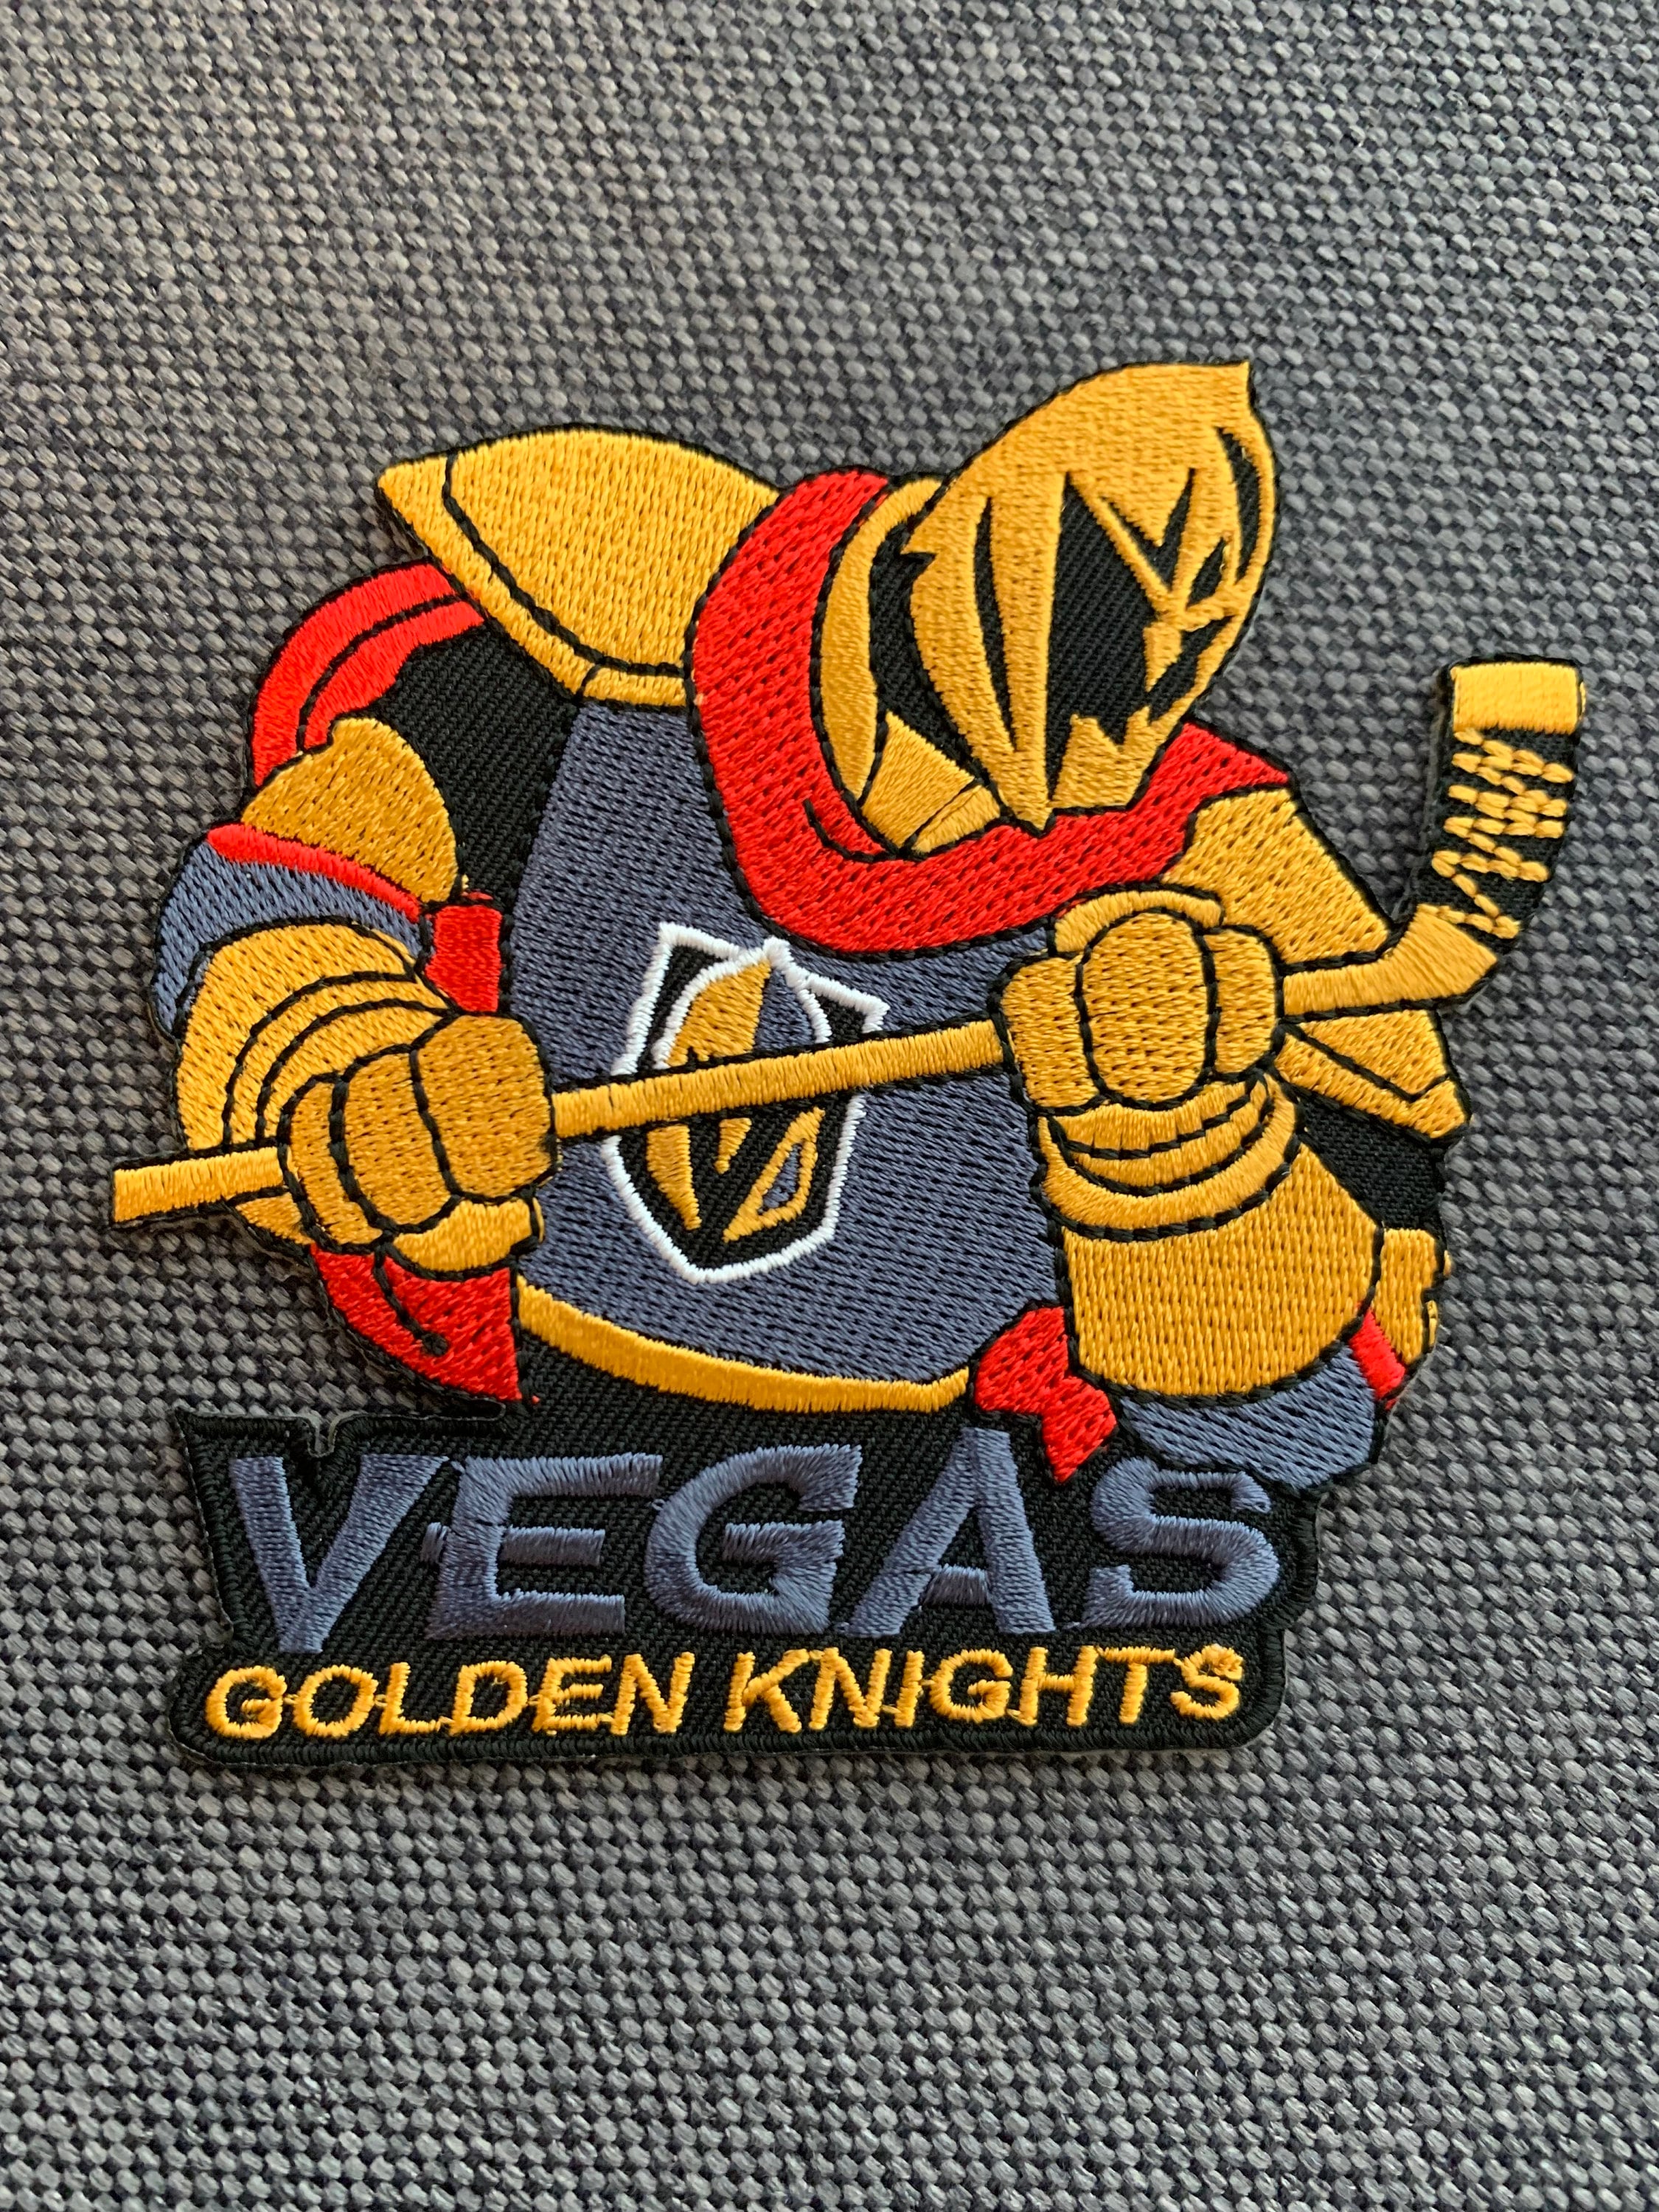 Golden Knights to Have Circa Sports Patch on Home Jerseys in 2022-23